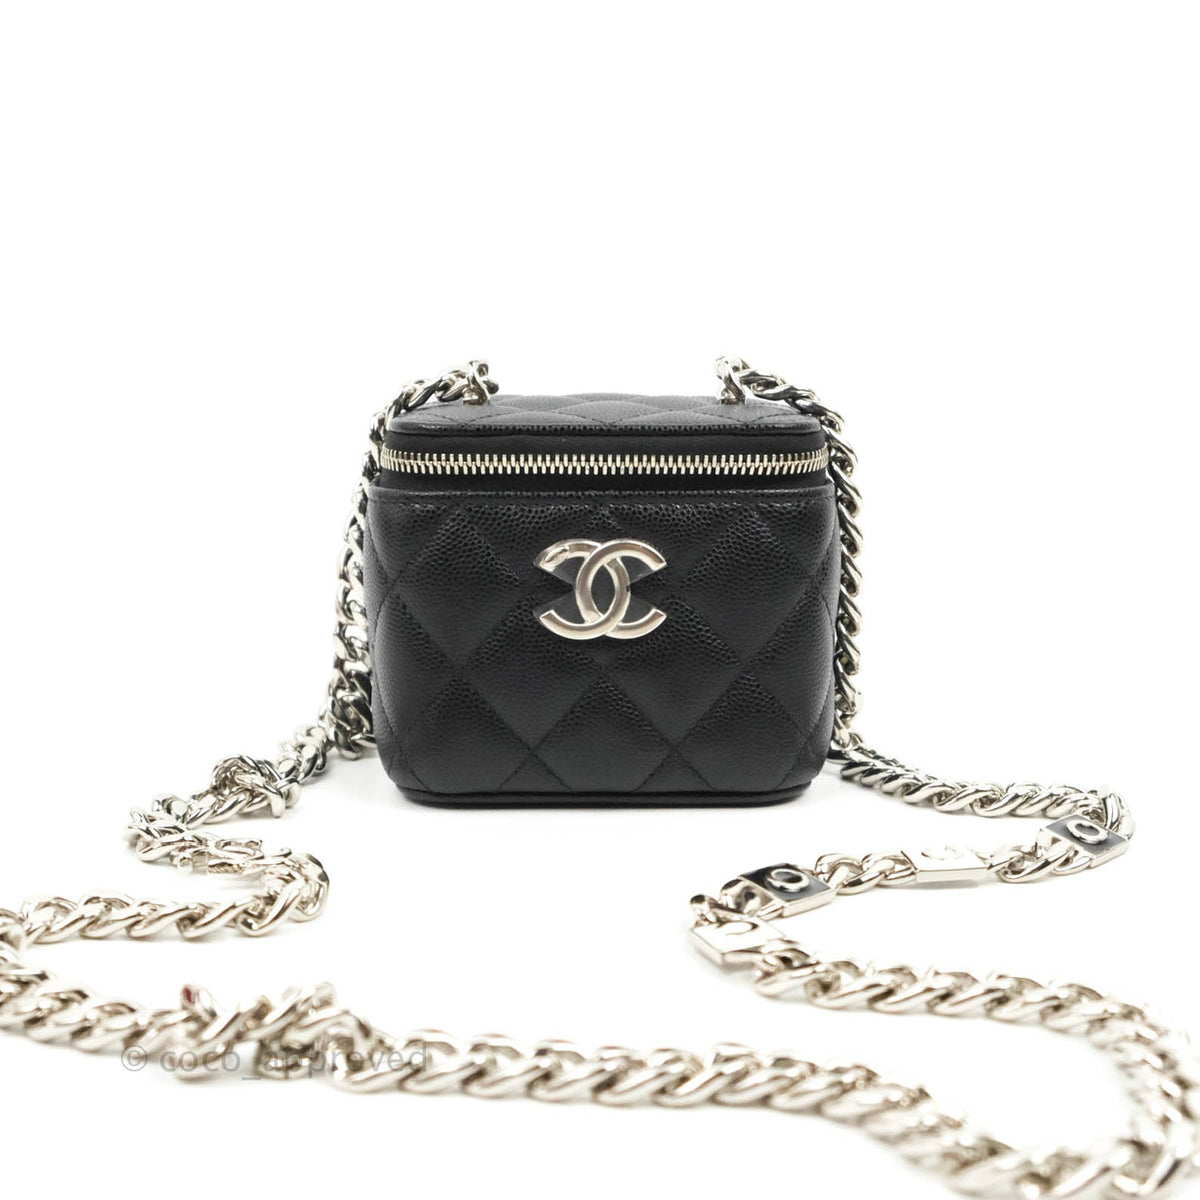 CHANEL Caviar Quilted Mini Vanity Case With Chain Black | FASHIONPHILE